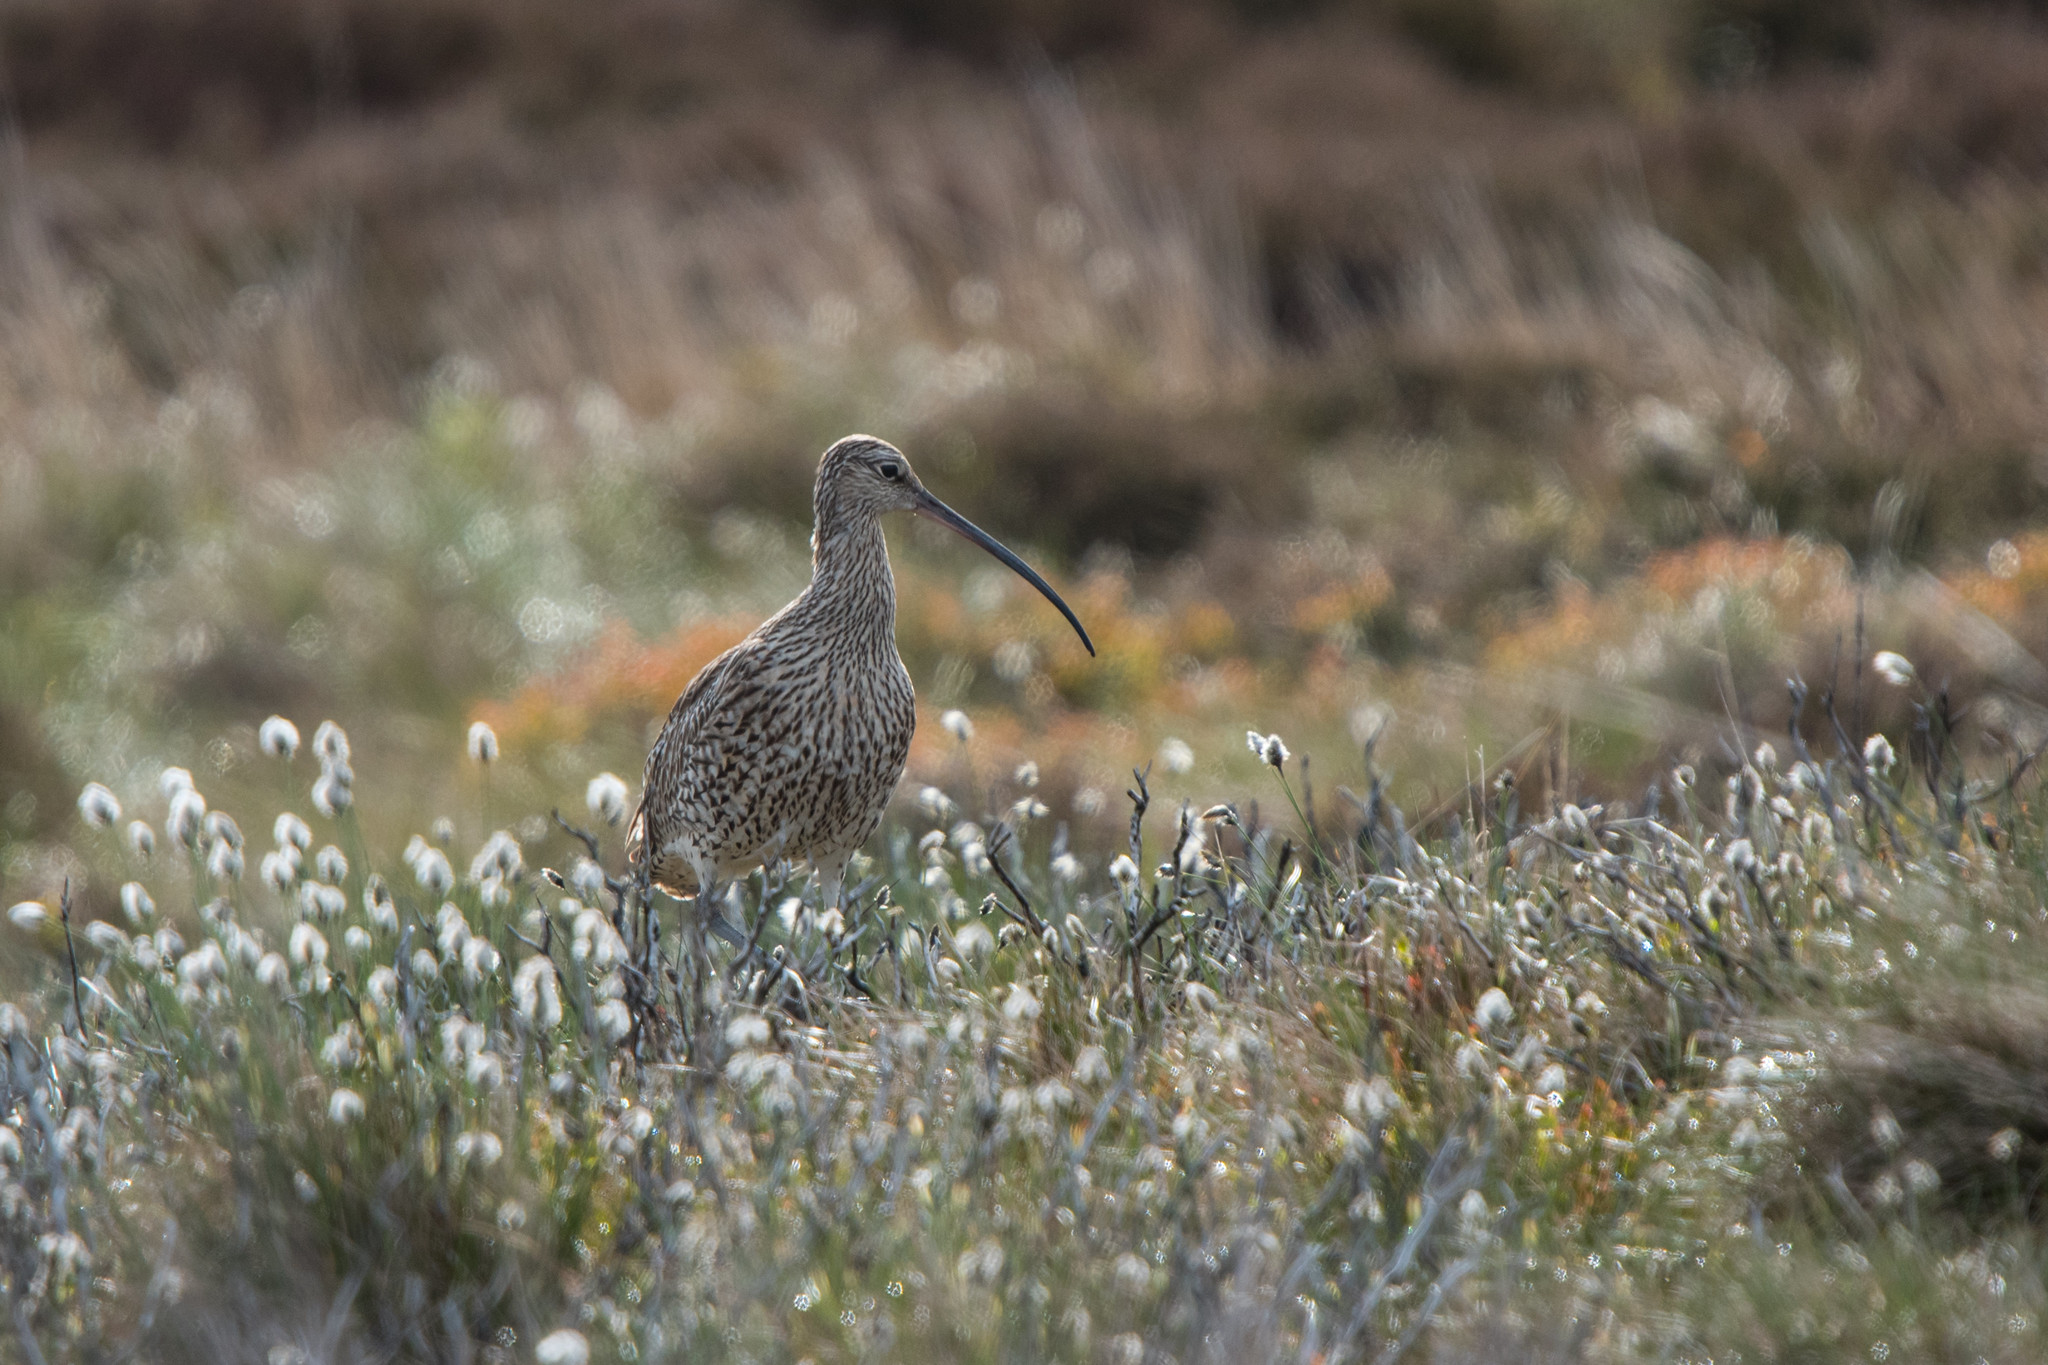 a eurasian curlew standing peacefully in a mixed grassy area. The ground has slight rolling hills. White cottony tufts stick up from some of the plants in the foreground